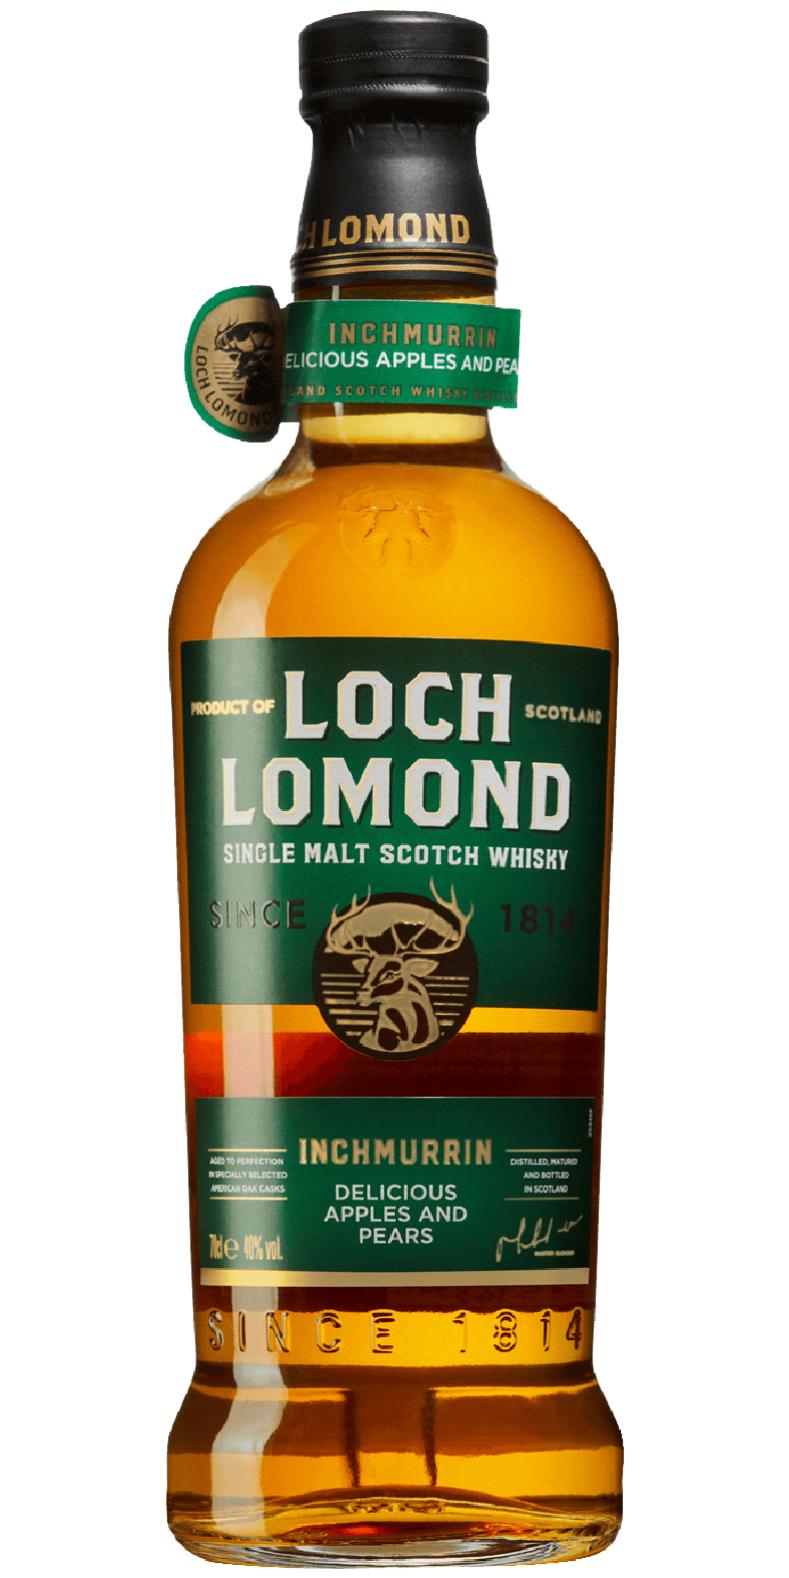 Inchmurrin Single Malt Scotch Whisky Delicious Apples and Pears Bourbon Refill and Recharred Oak 40% 700ml